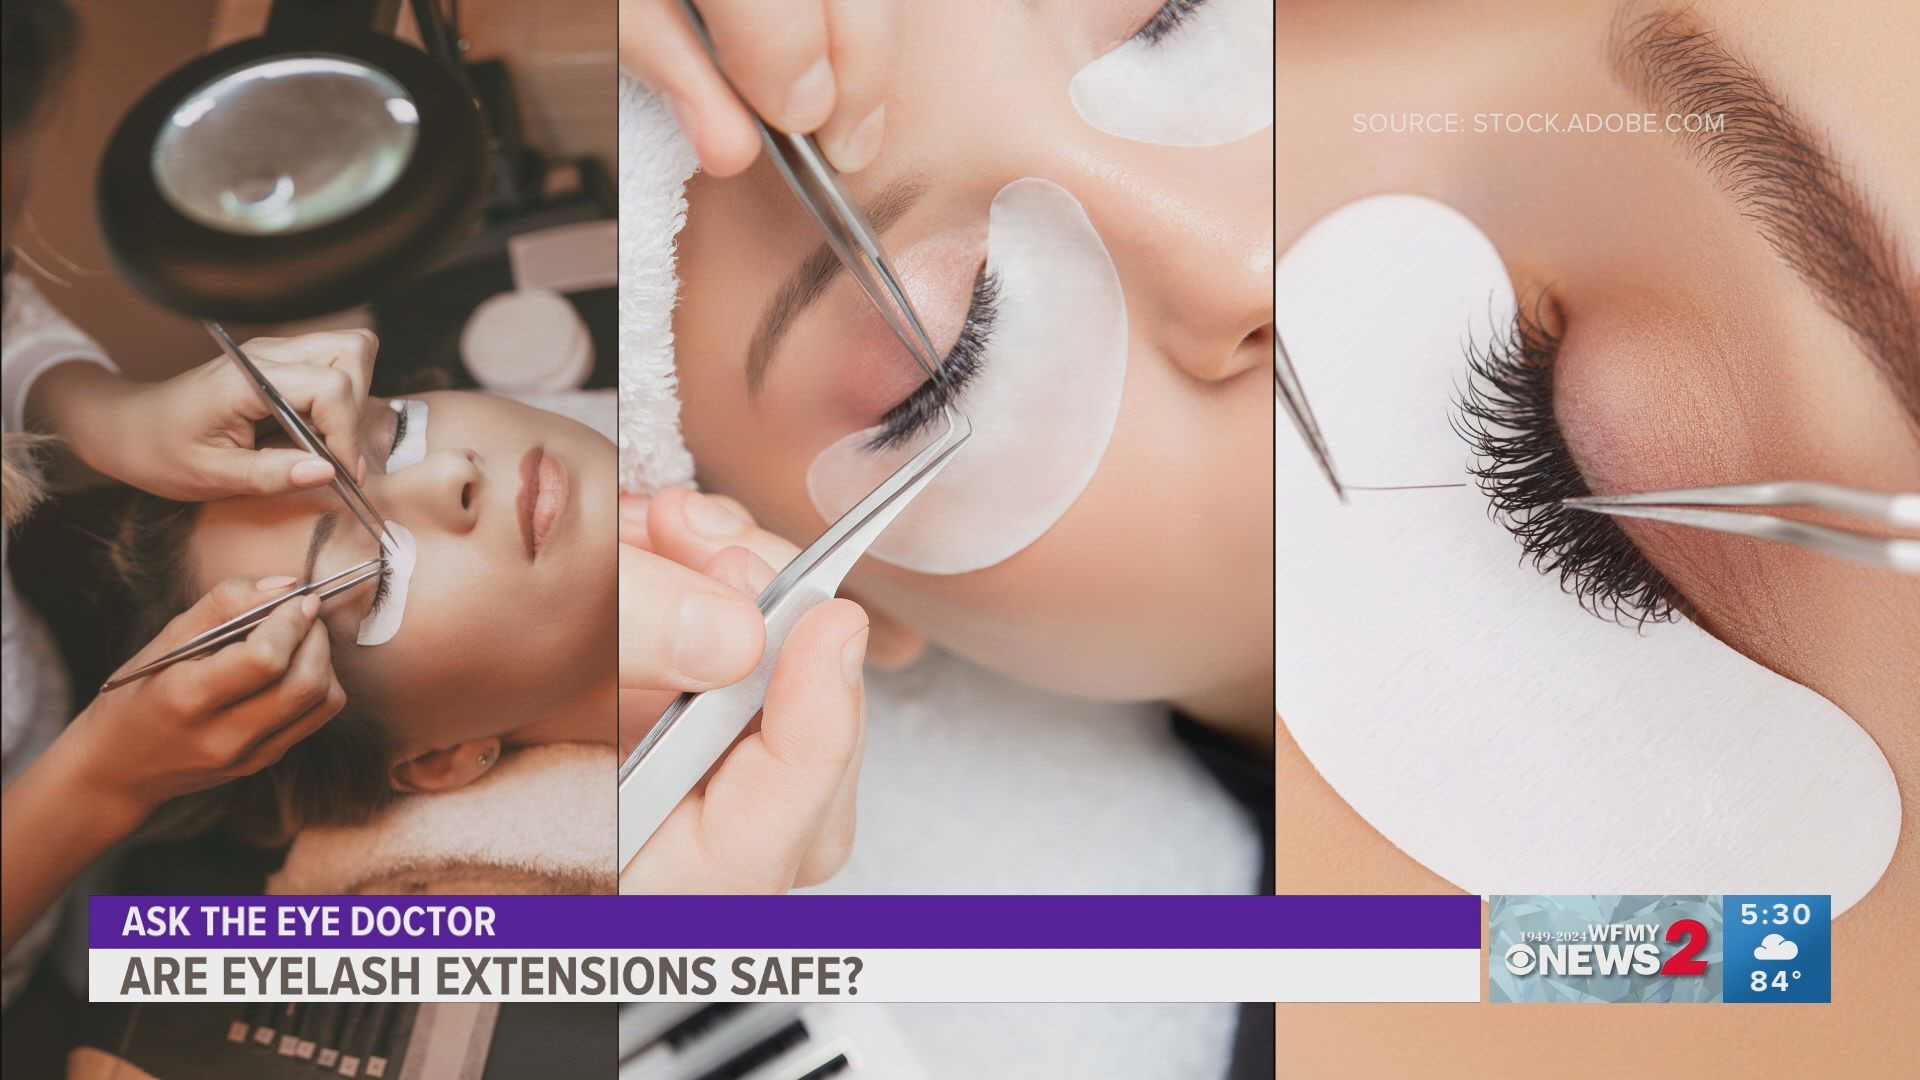 Triad eye doctor sets the record straight on whether eyelash extensions are safe.